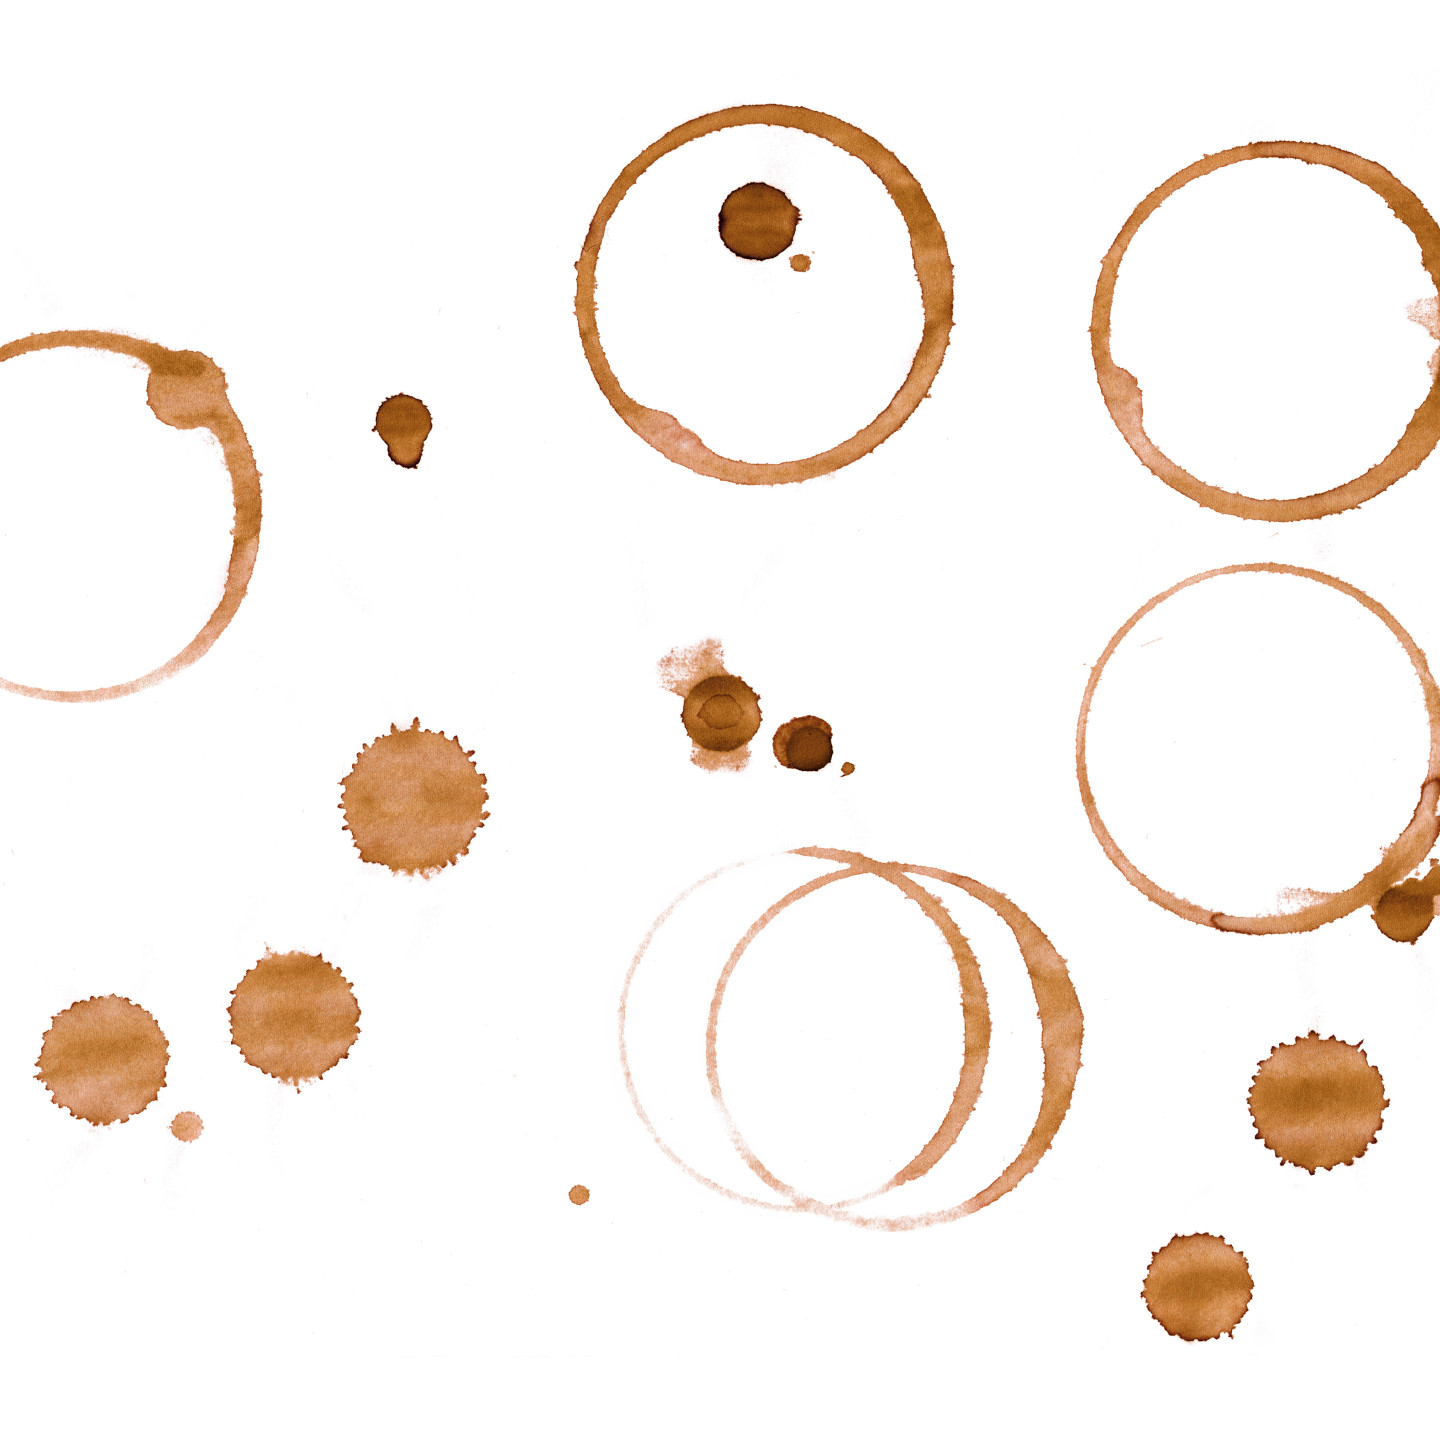 coffee stain rings isolated on white background 2022 09 27 17 18 39 utc